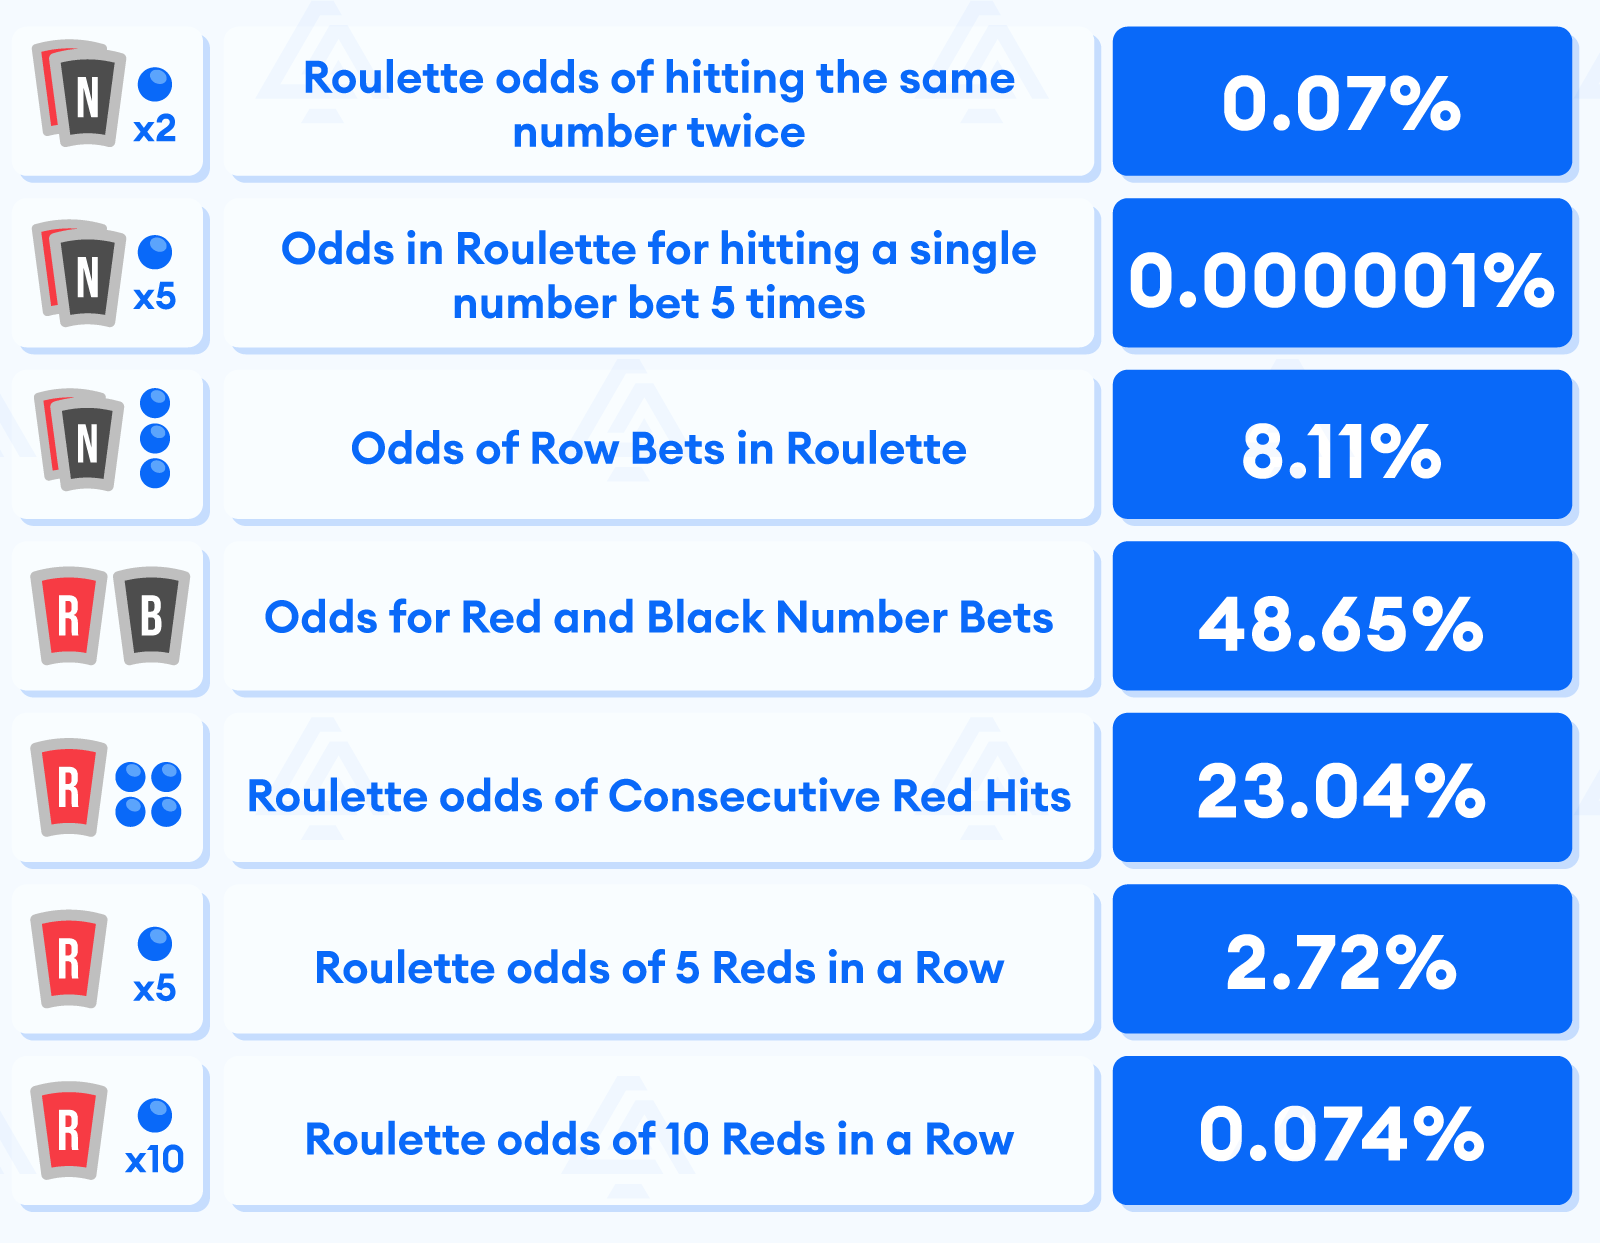 Roulette Odds on Single Number Bets